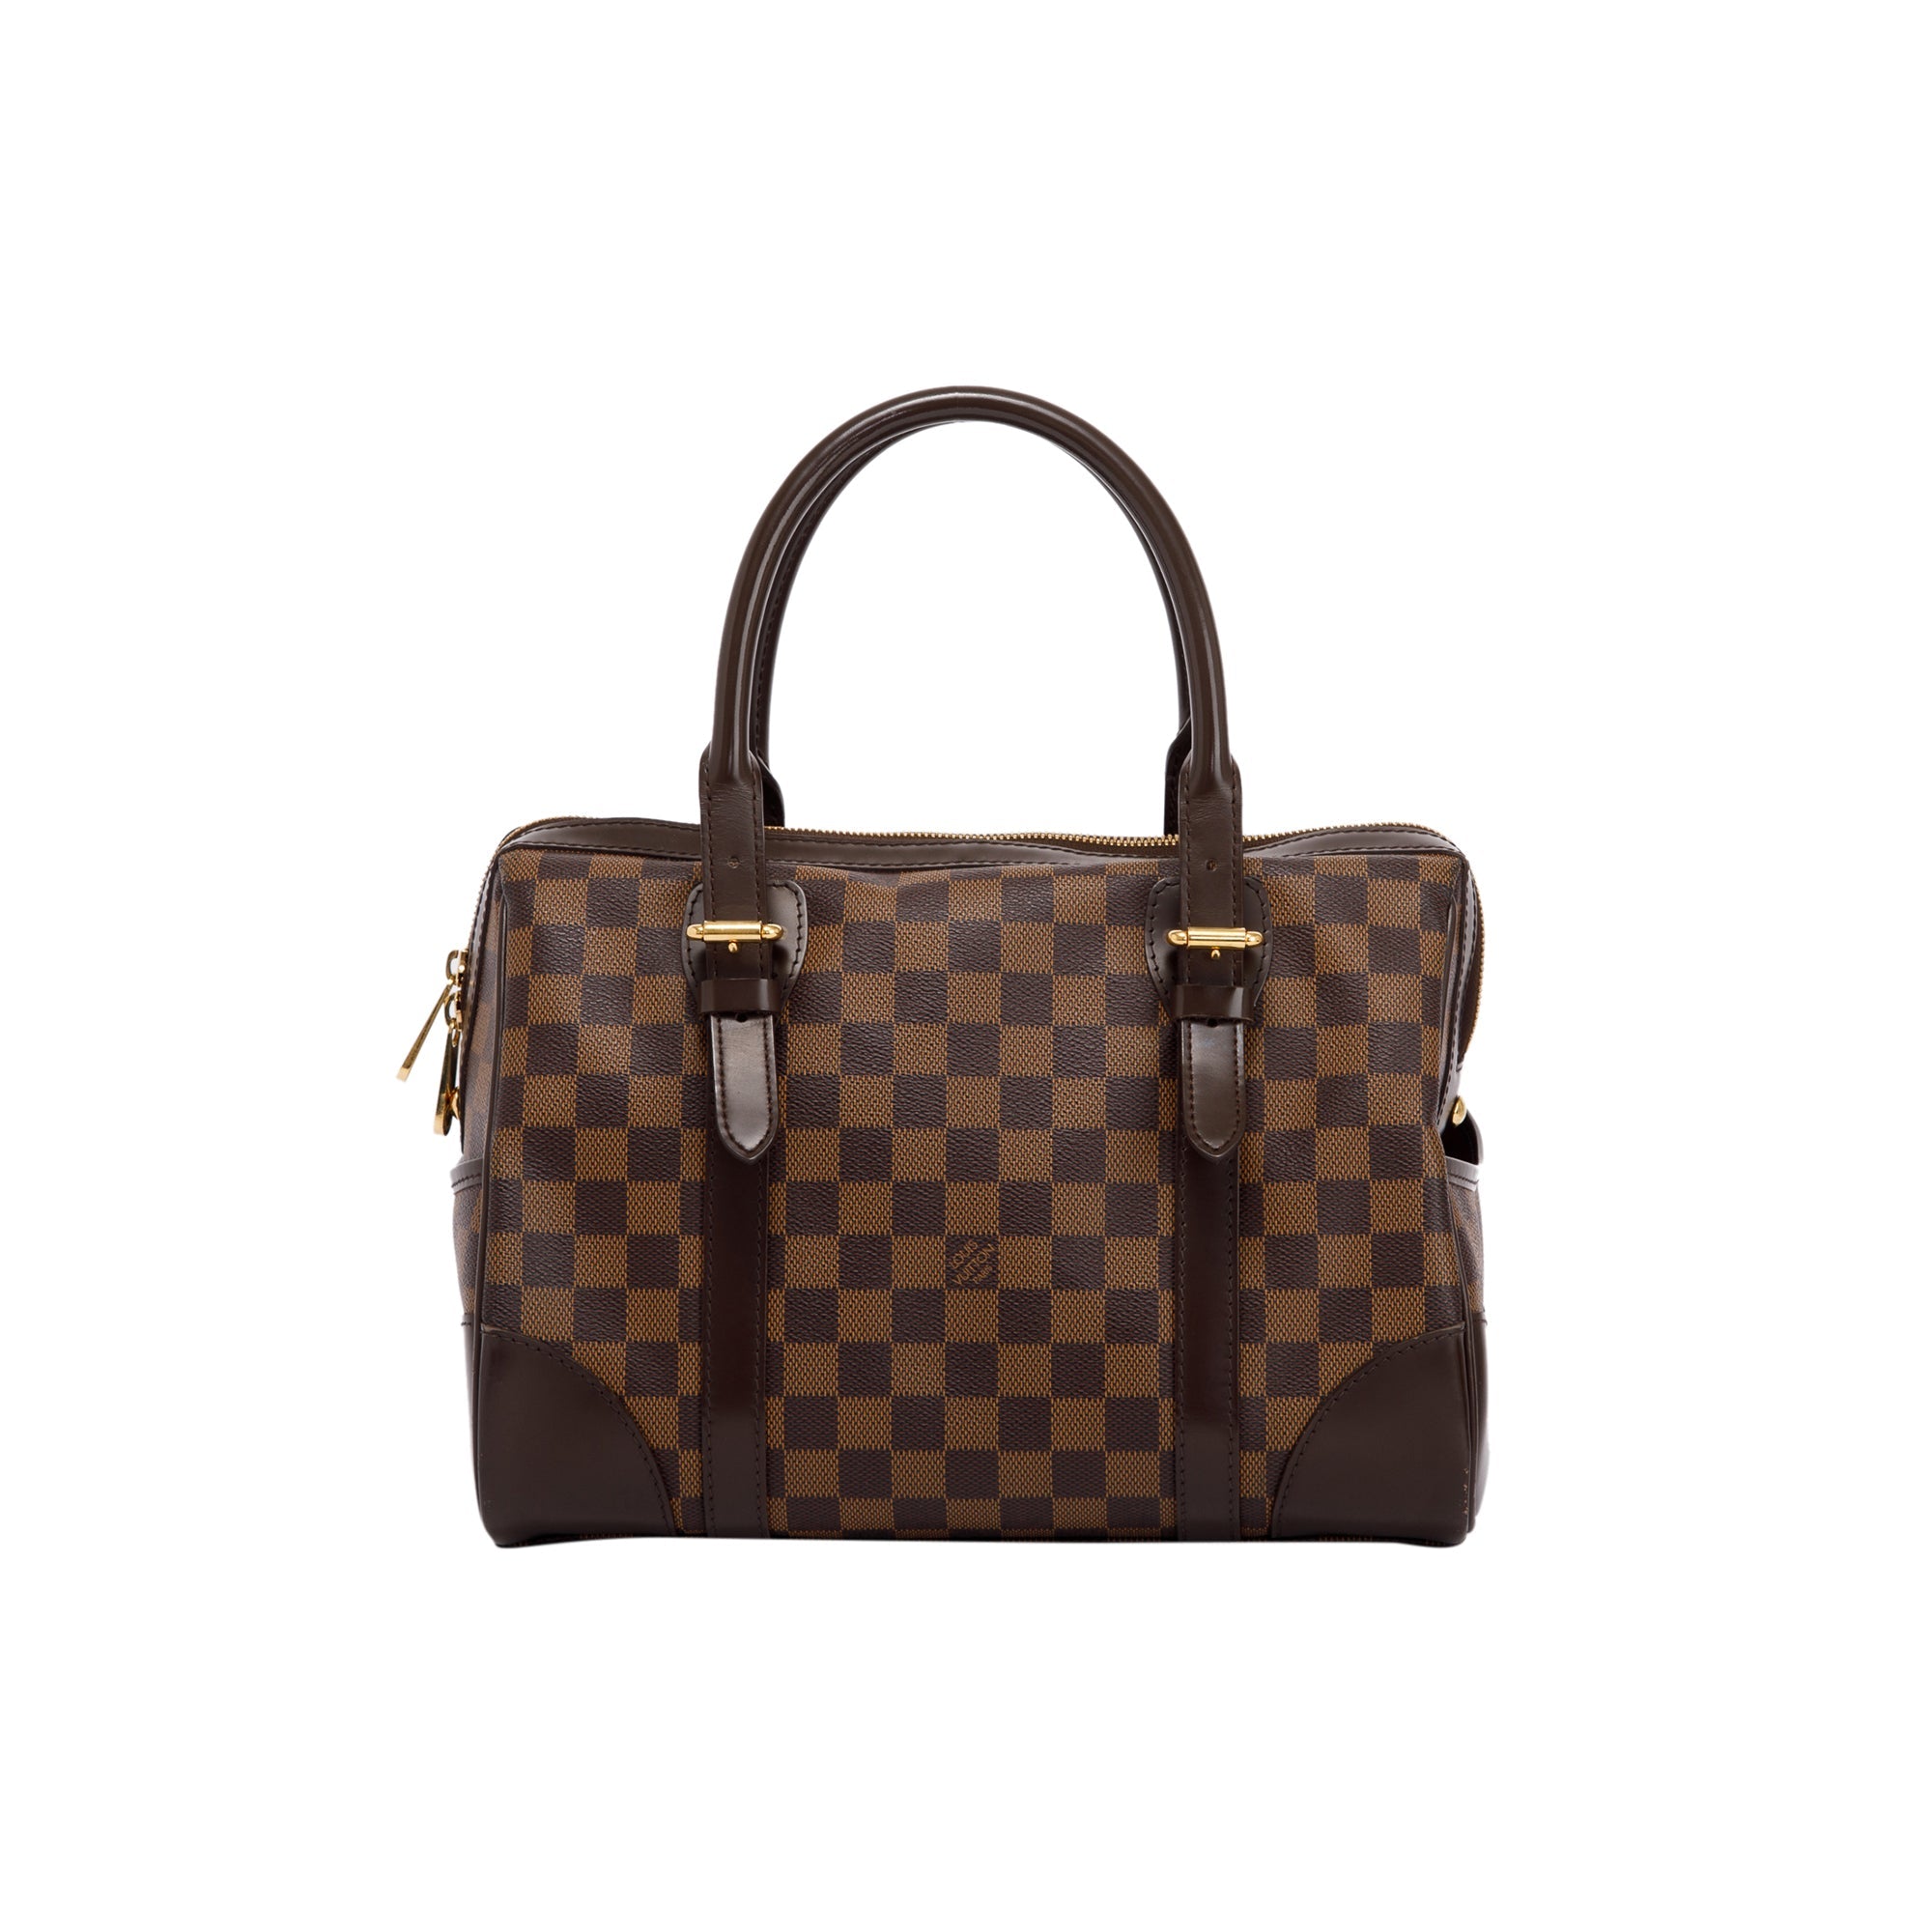 The Louis Vuitton Berkeley is like a Speedy 30 with additional